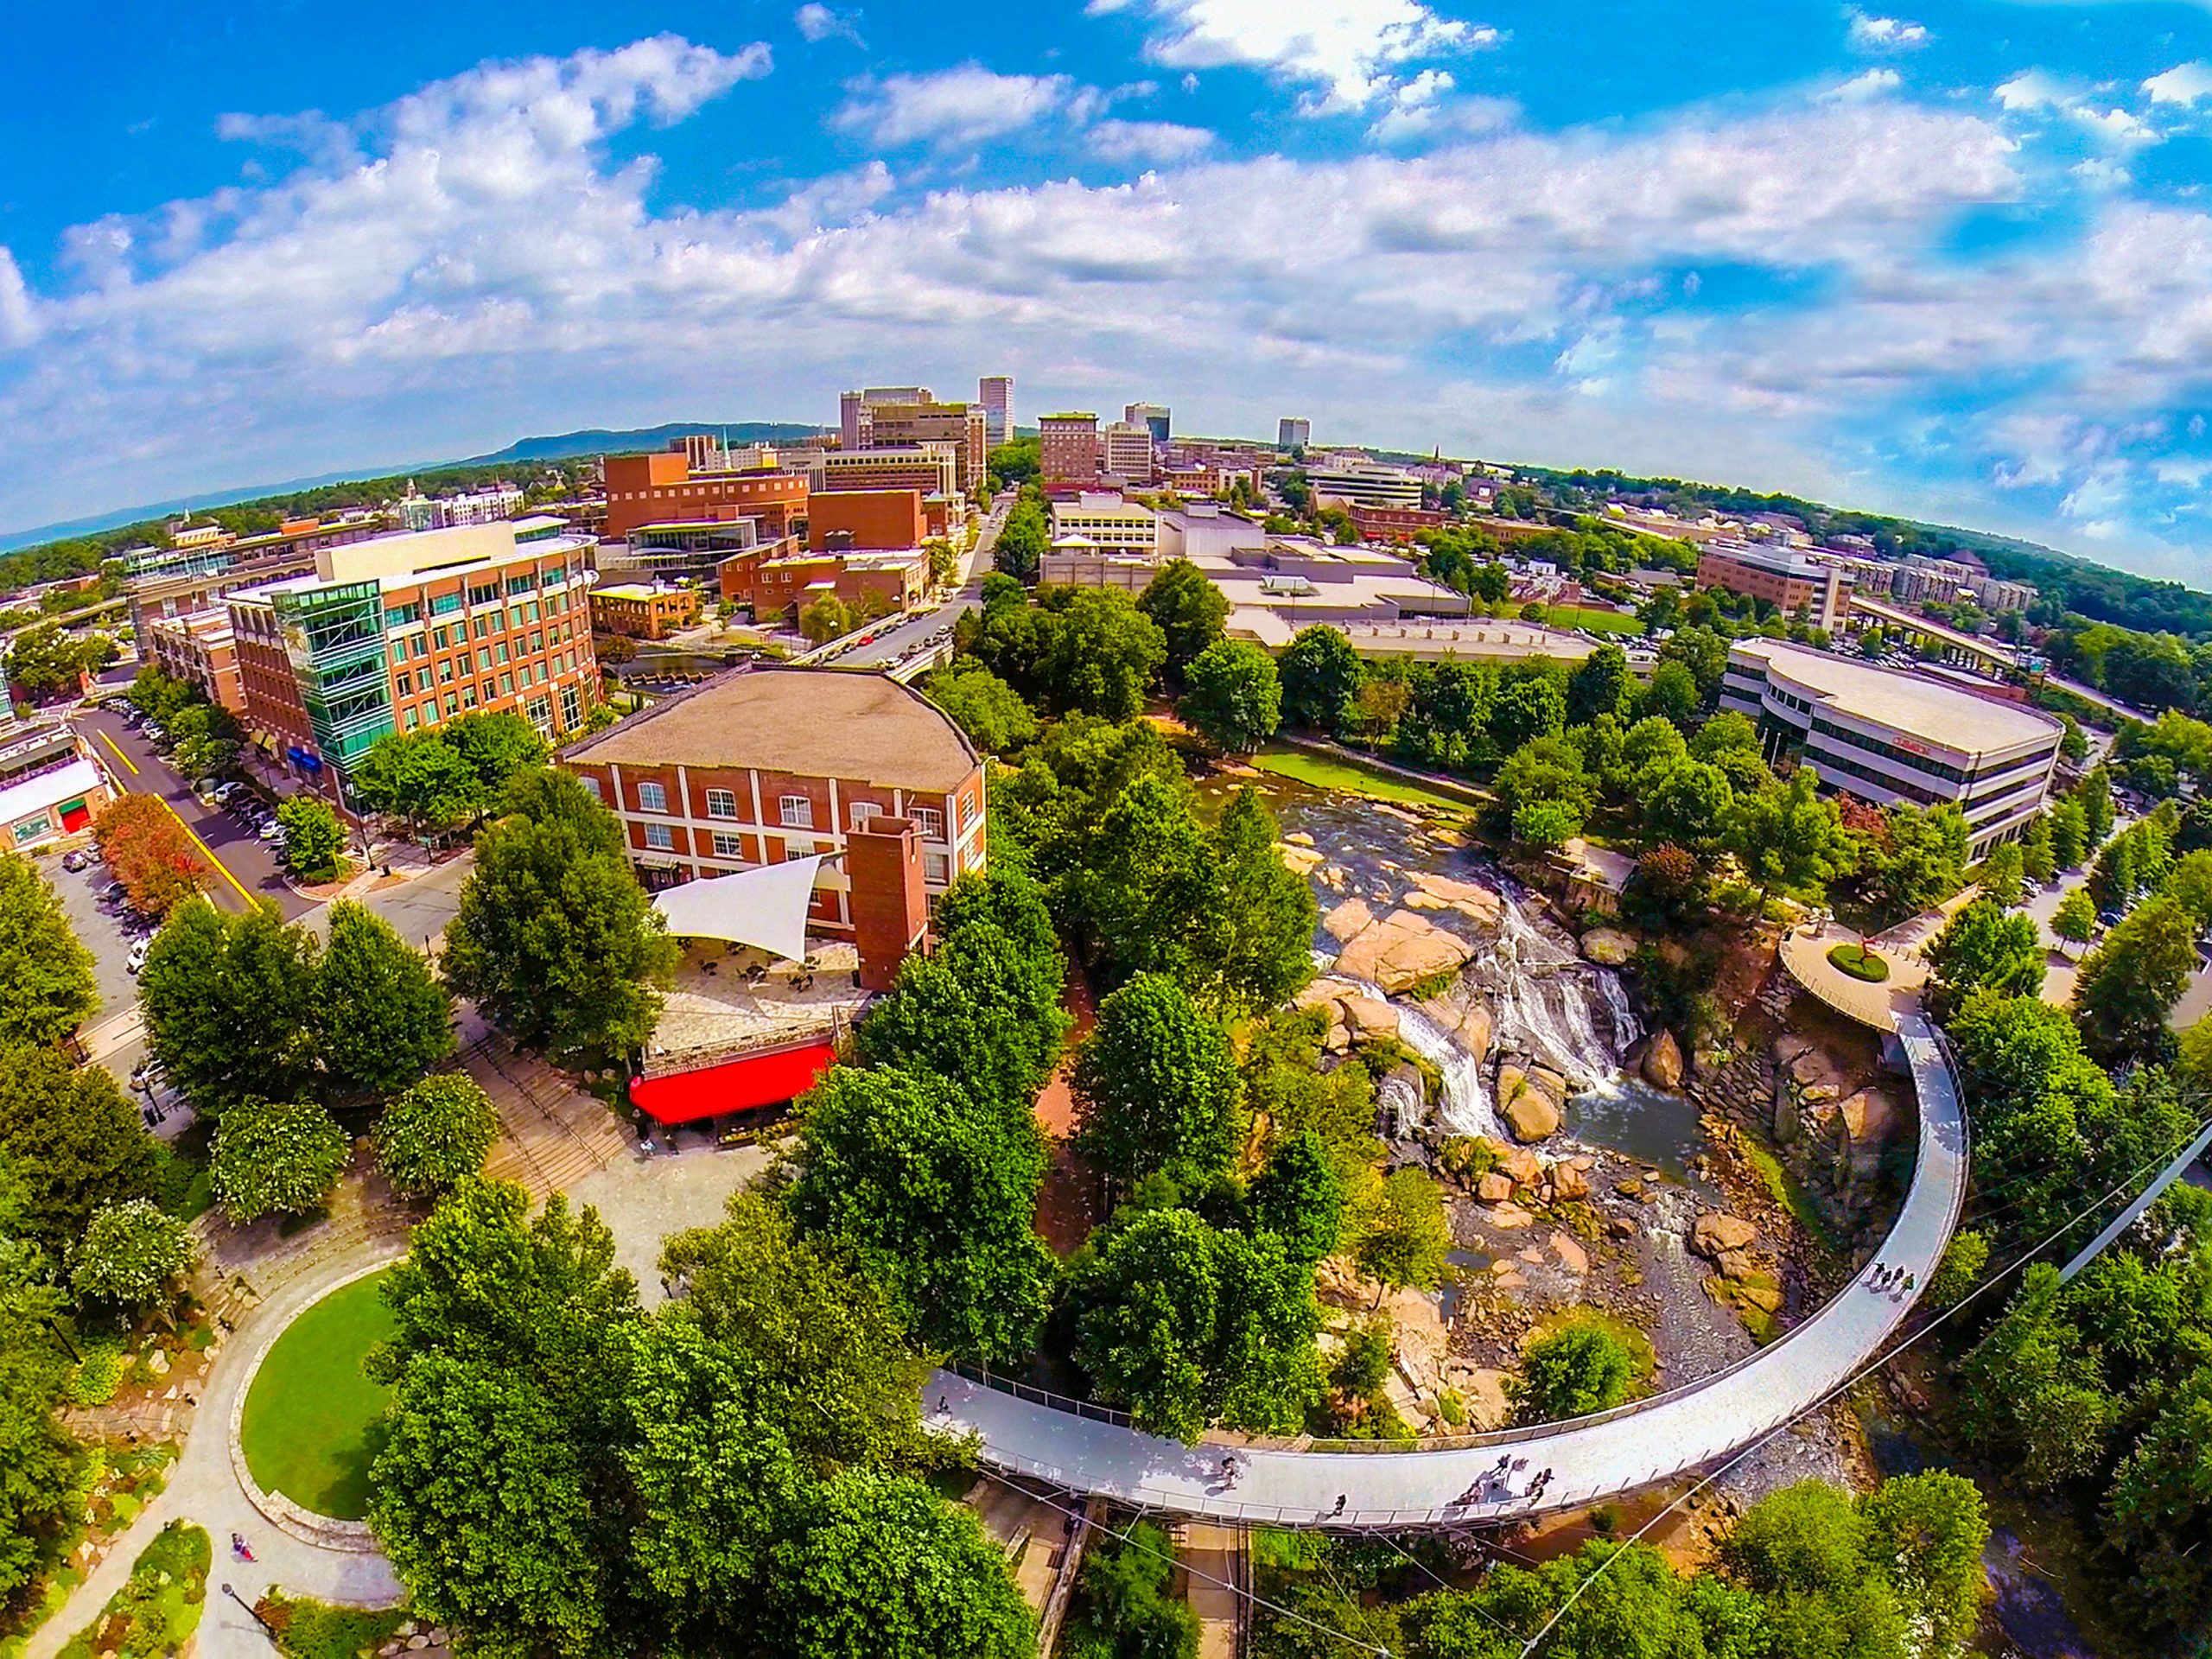 The host for the 2015 GEICO Bassmaster Classic is Greenville, S.C. This aerial view of downtown Greenville shows Liberty Bridge at Falls Park on the Reedy. This wooded valley park is less than a mile away from the arena that will host the Classic weigh-ins.